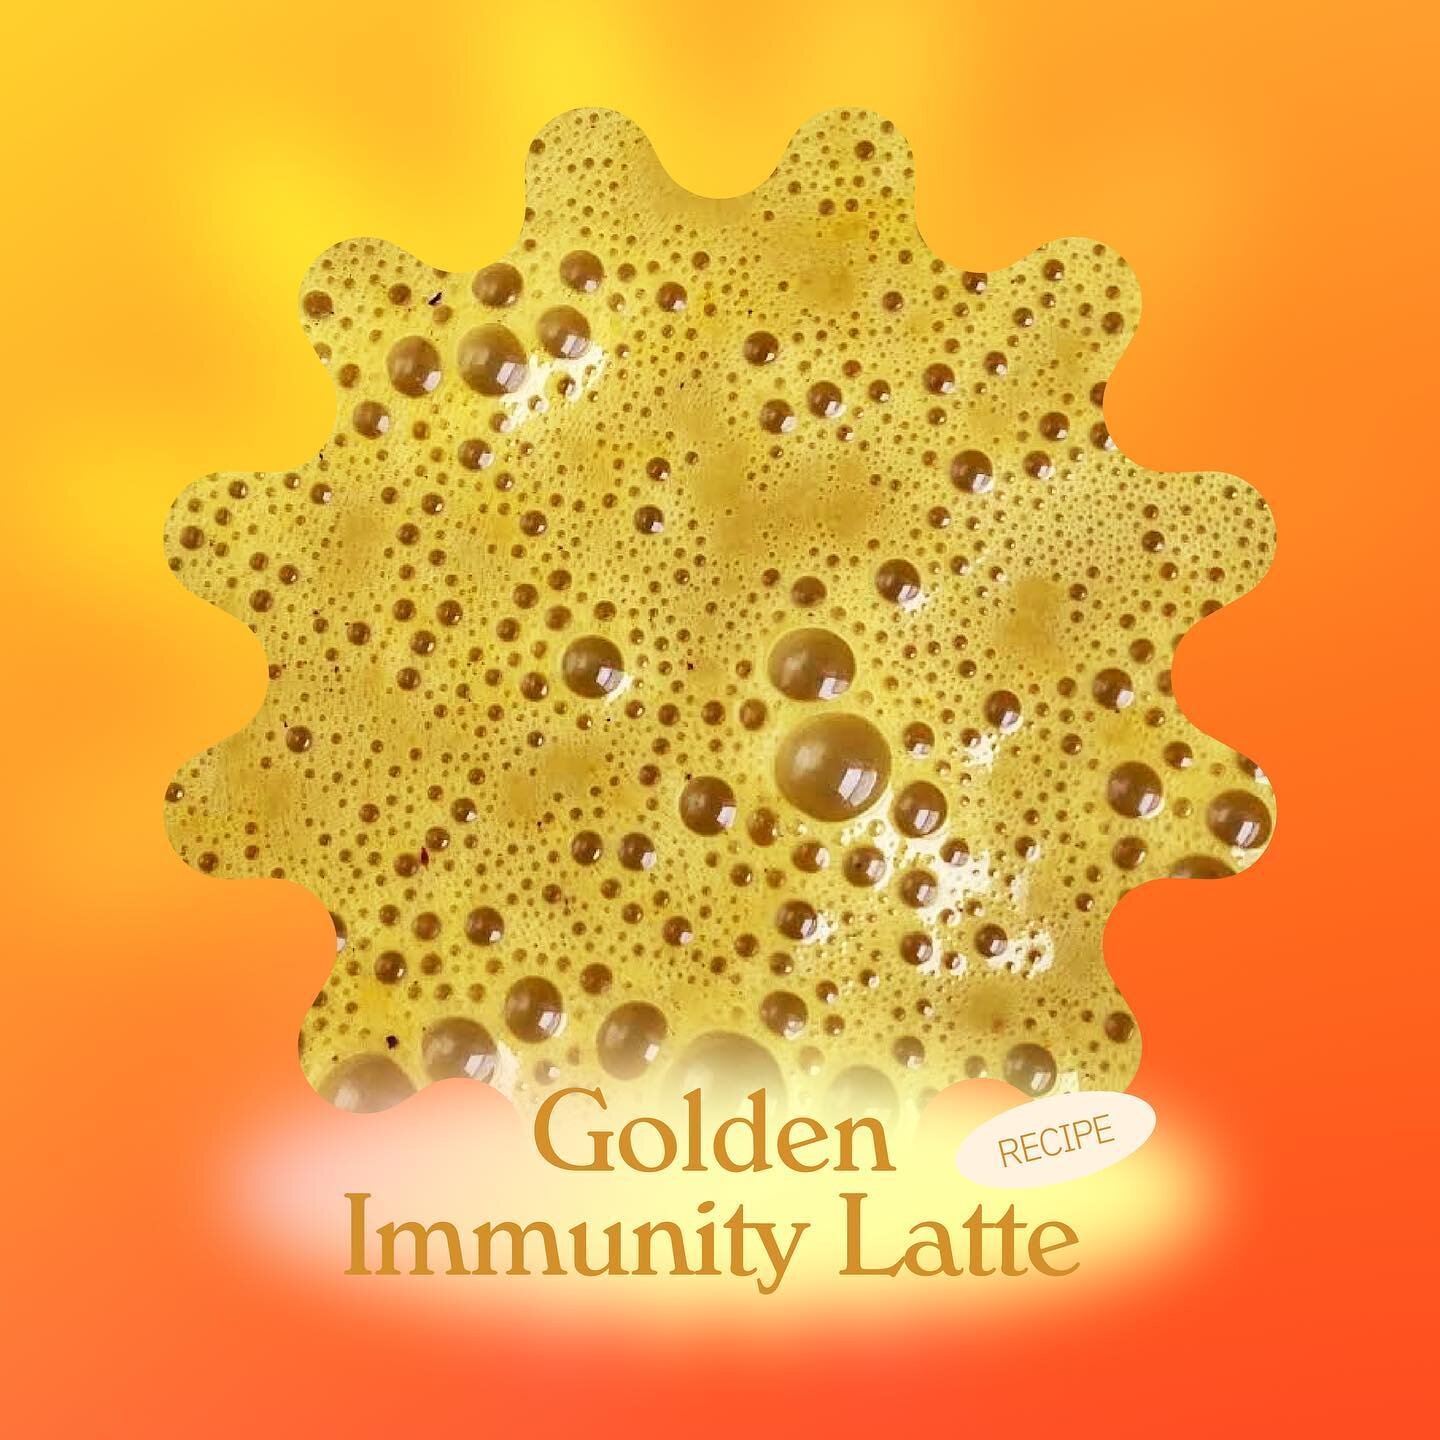 Give the gift of a boosted immune system to your favorite peeps this holiday season. Swipe to learn how to make an adaptogenic Golden Immunity latte! 🎁